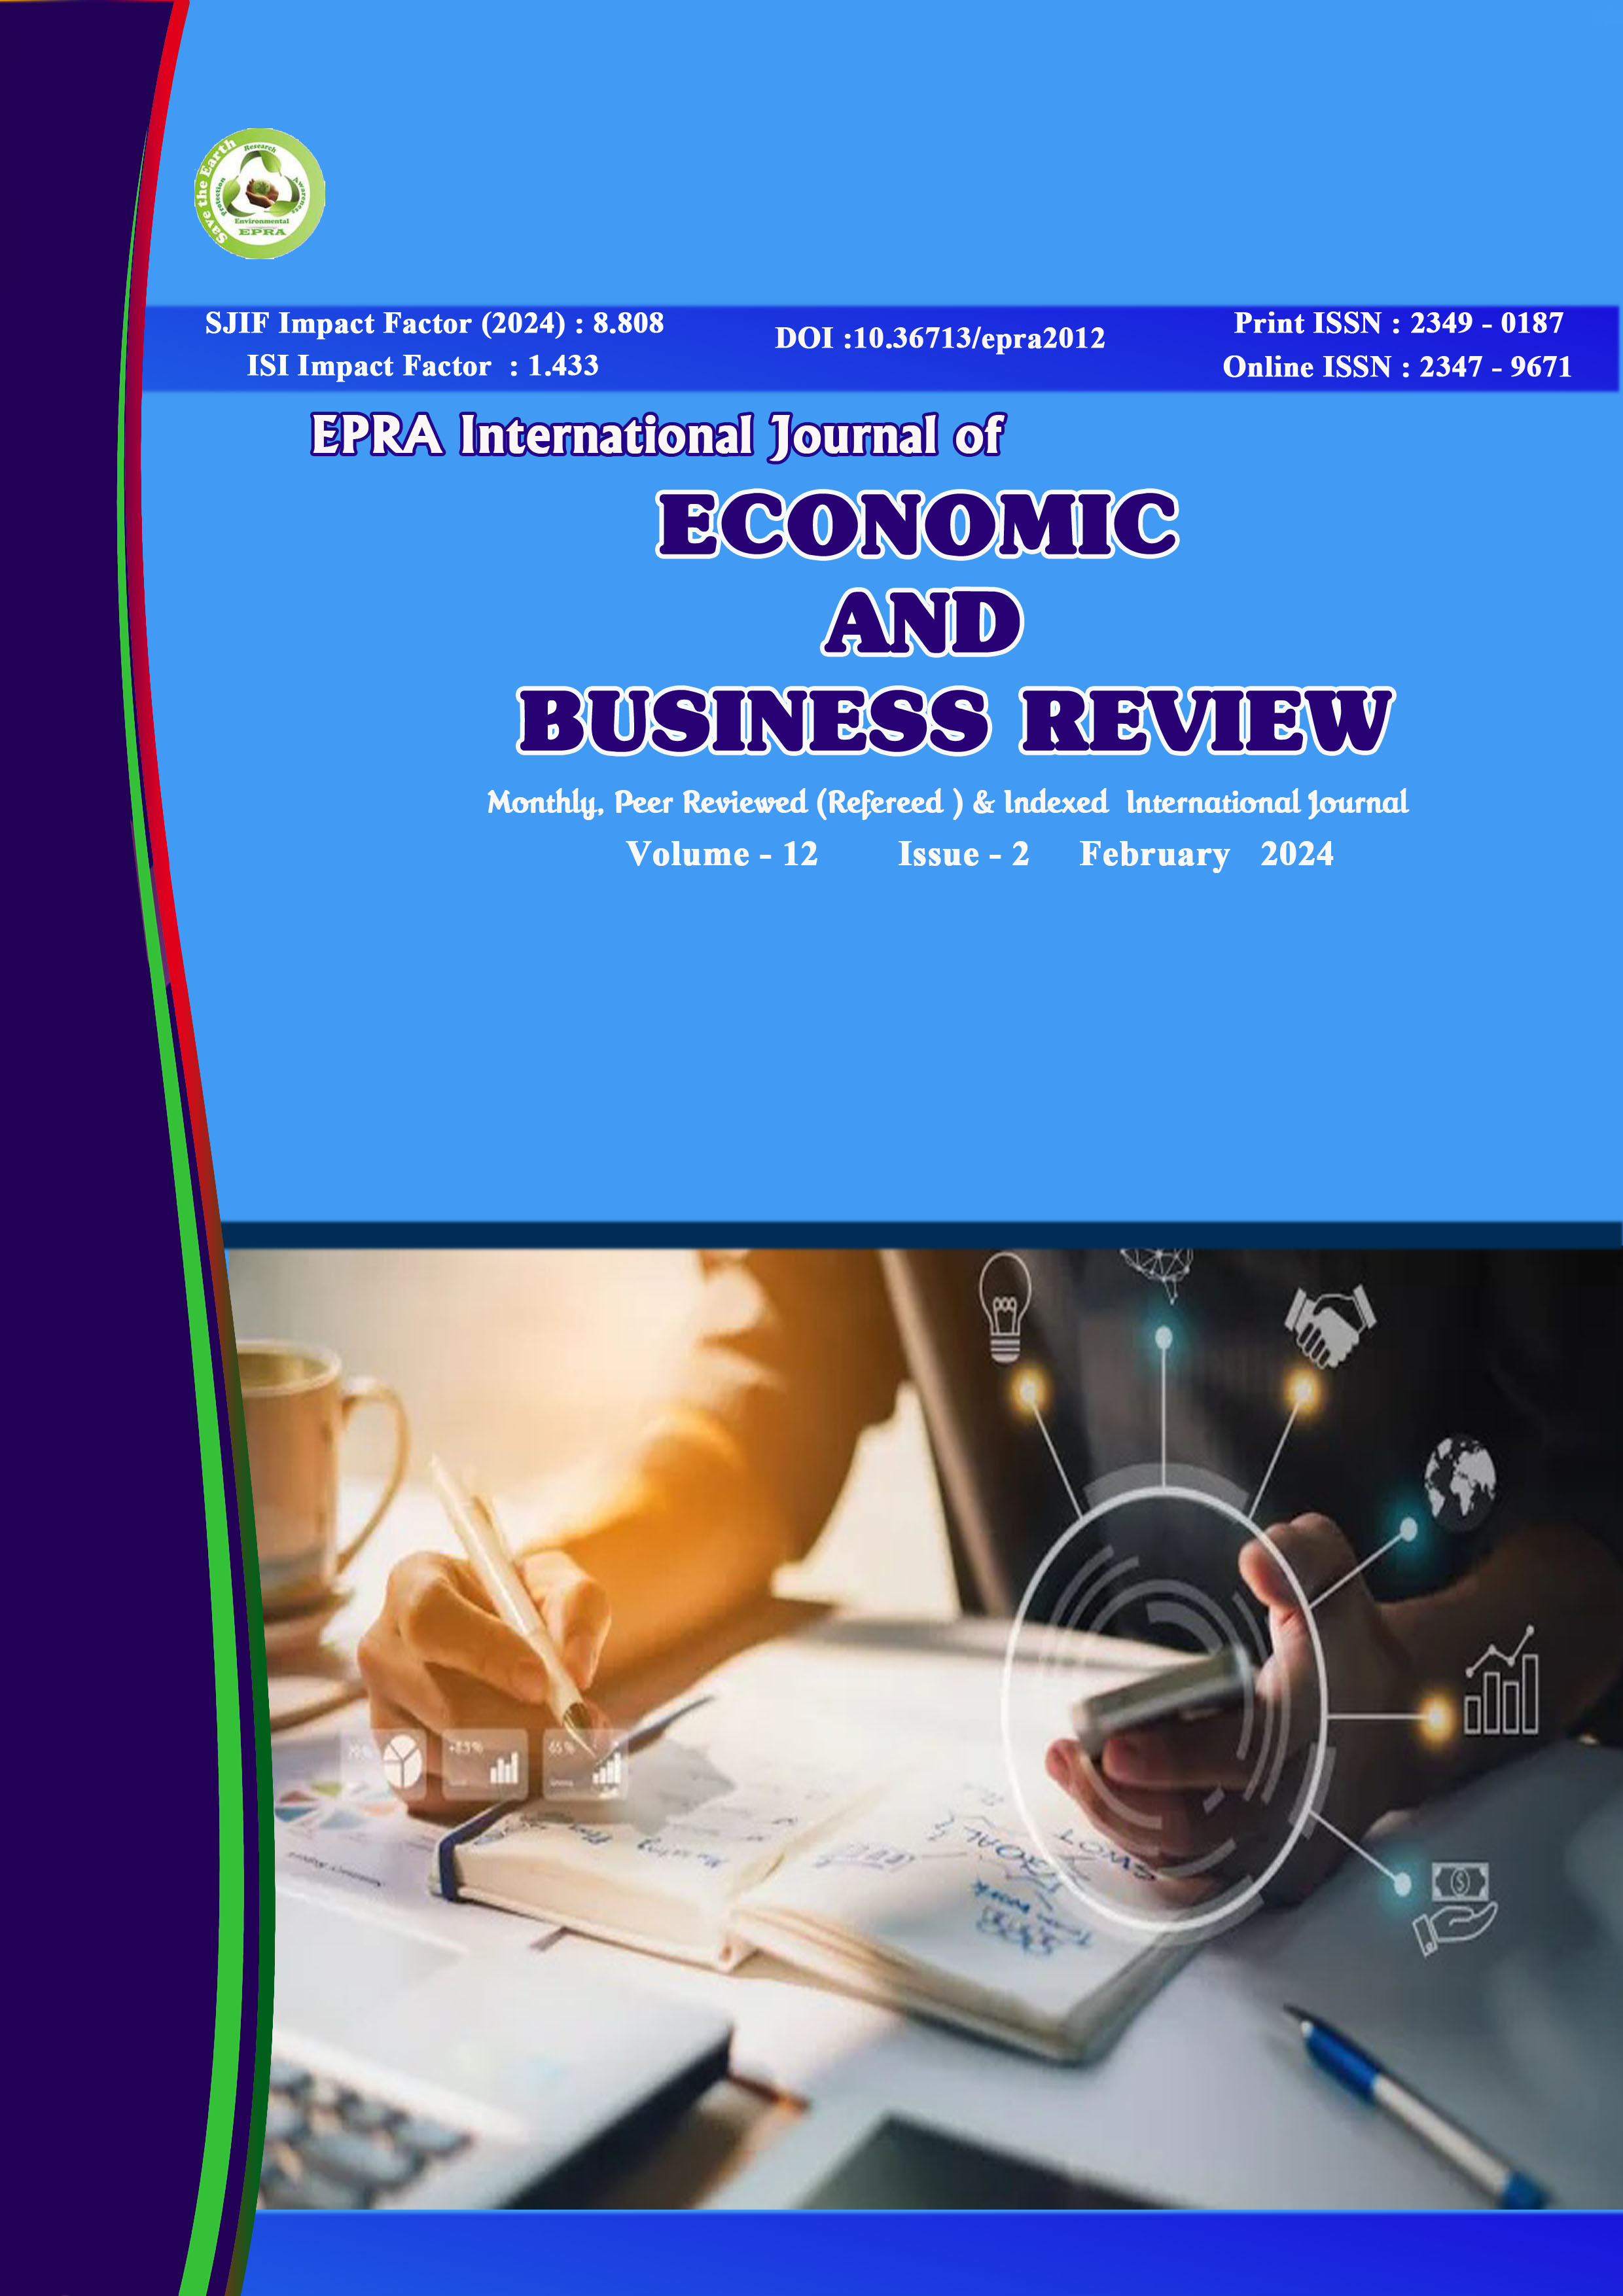 EPRA International Journal of Economic and Business Review(JEBR)